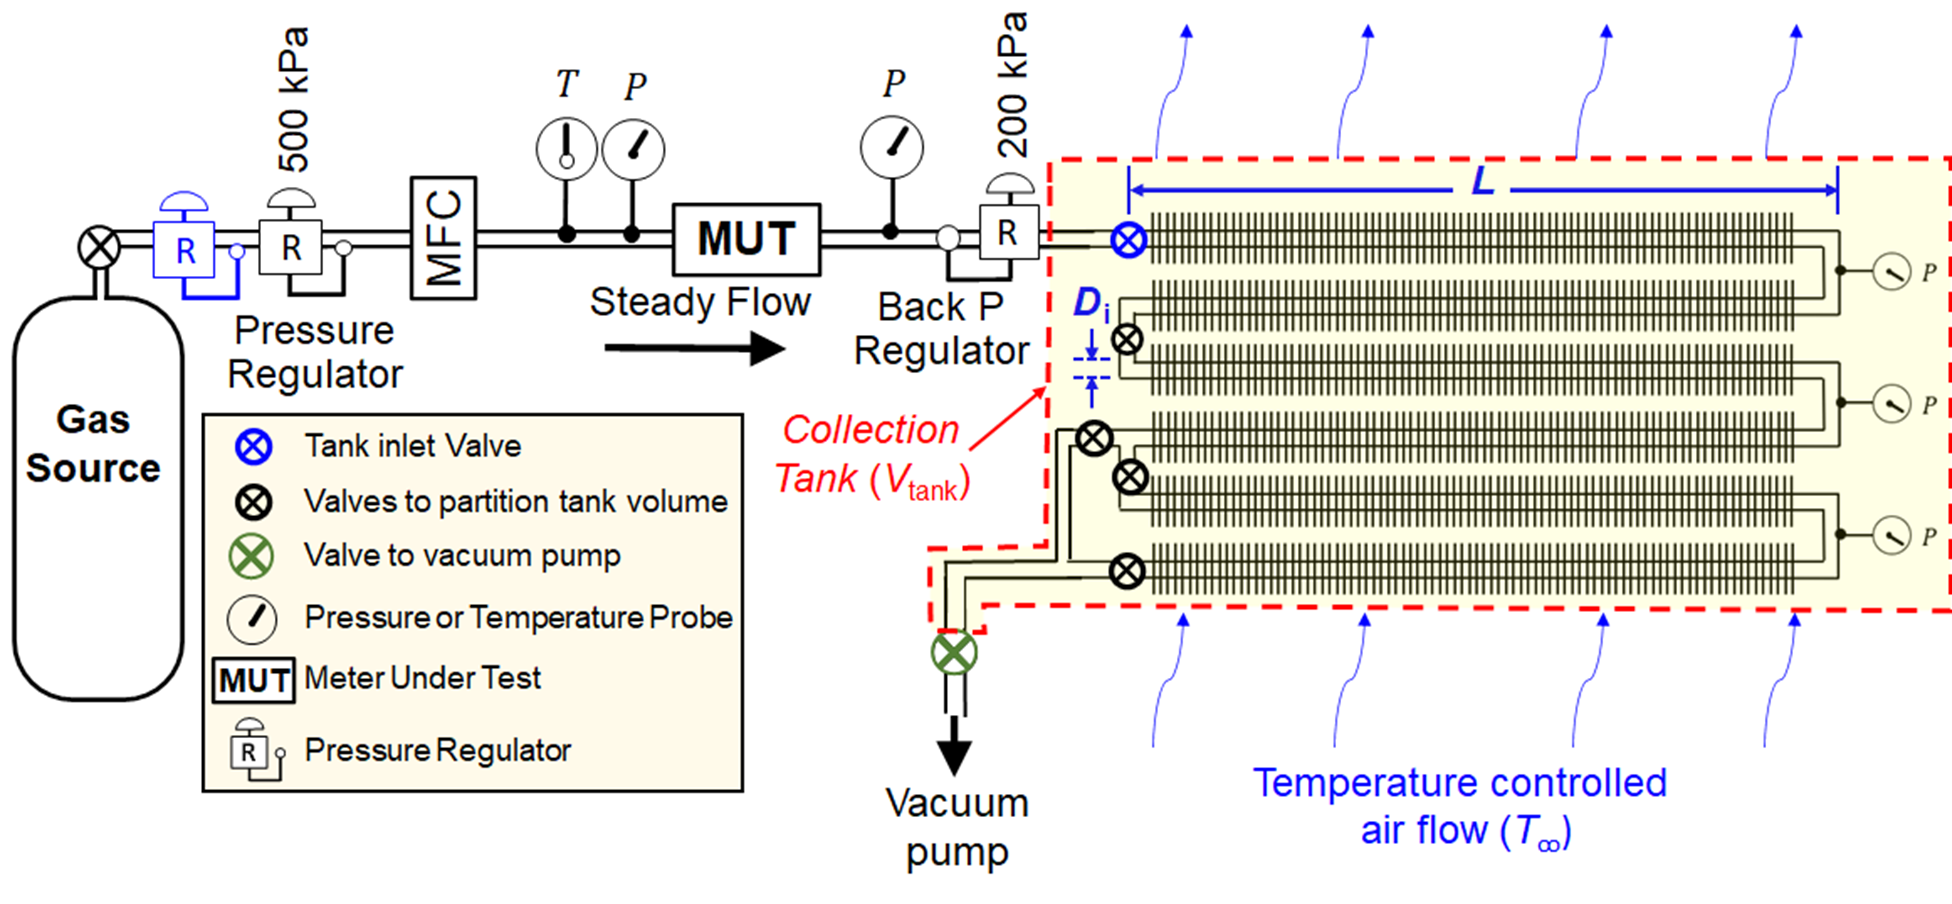 Schematic showing primary components of NIST’s SLowFlowS.